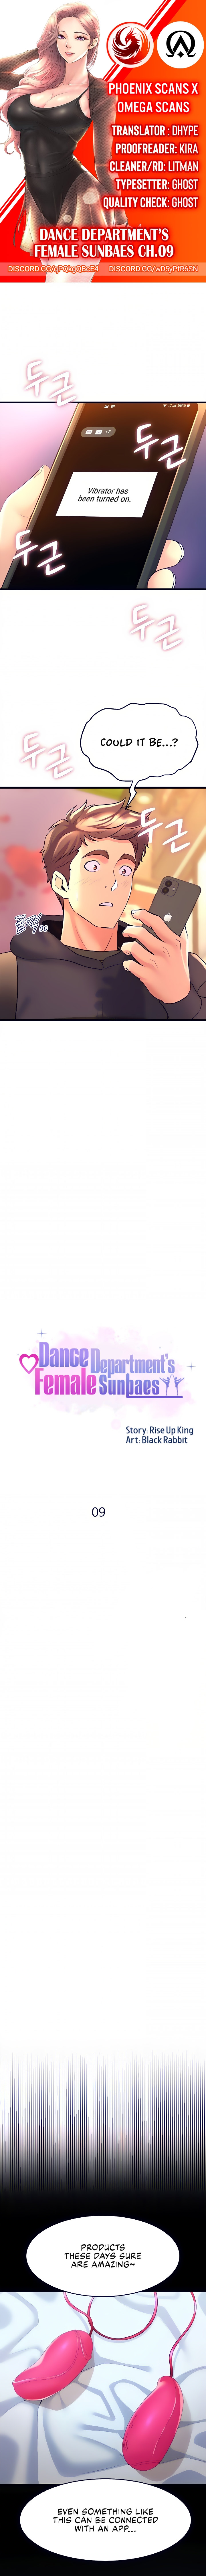 Dance Department’s Female Sunbaes - Chapter 9 Page 1